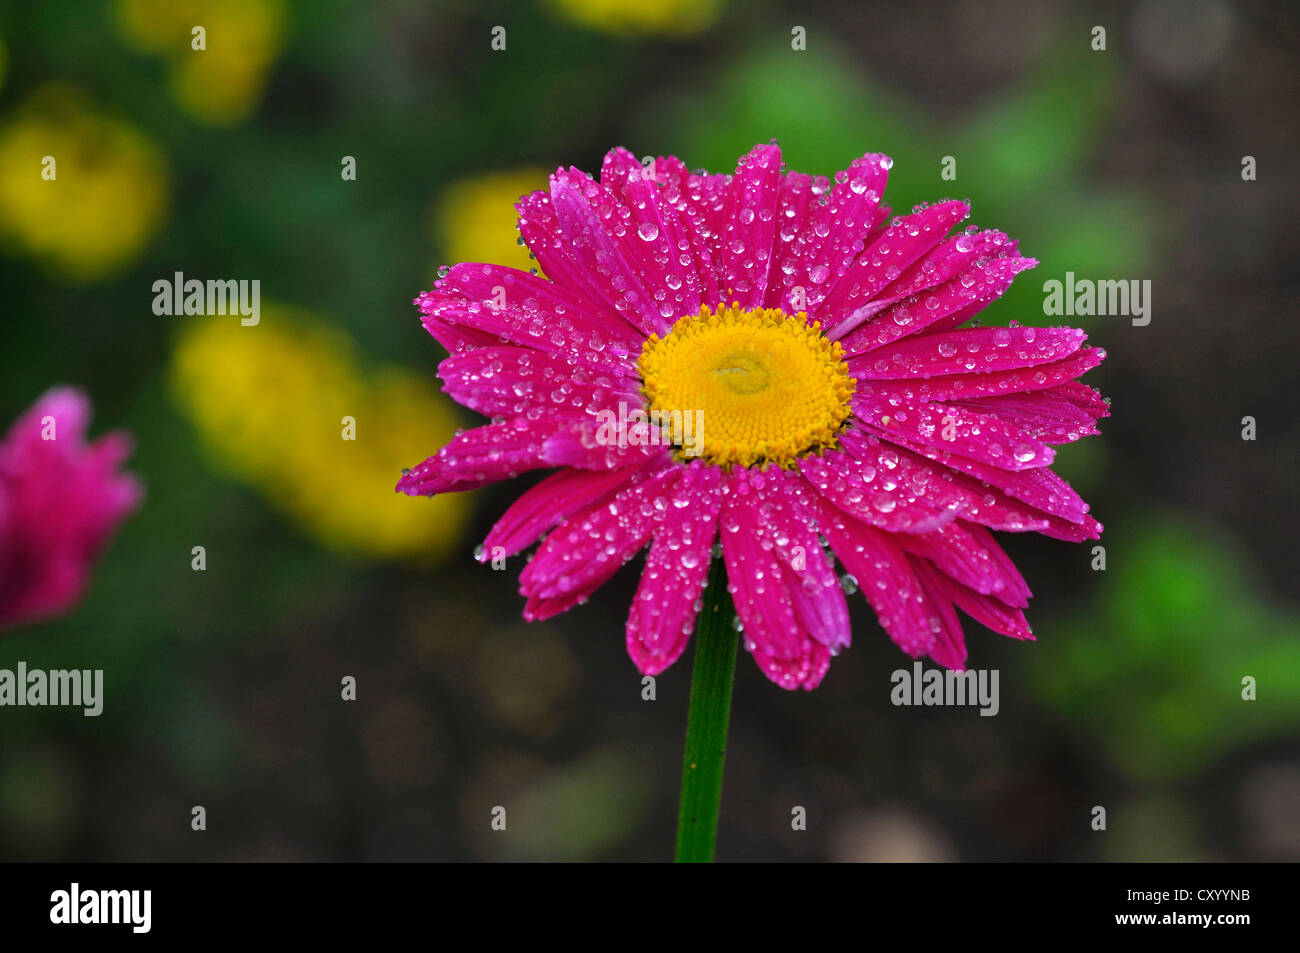 A pyrethrum flower sprinkled with raindrops UK Stock Photo